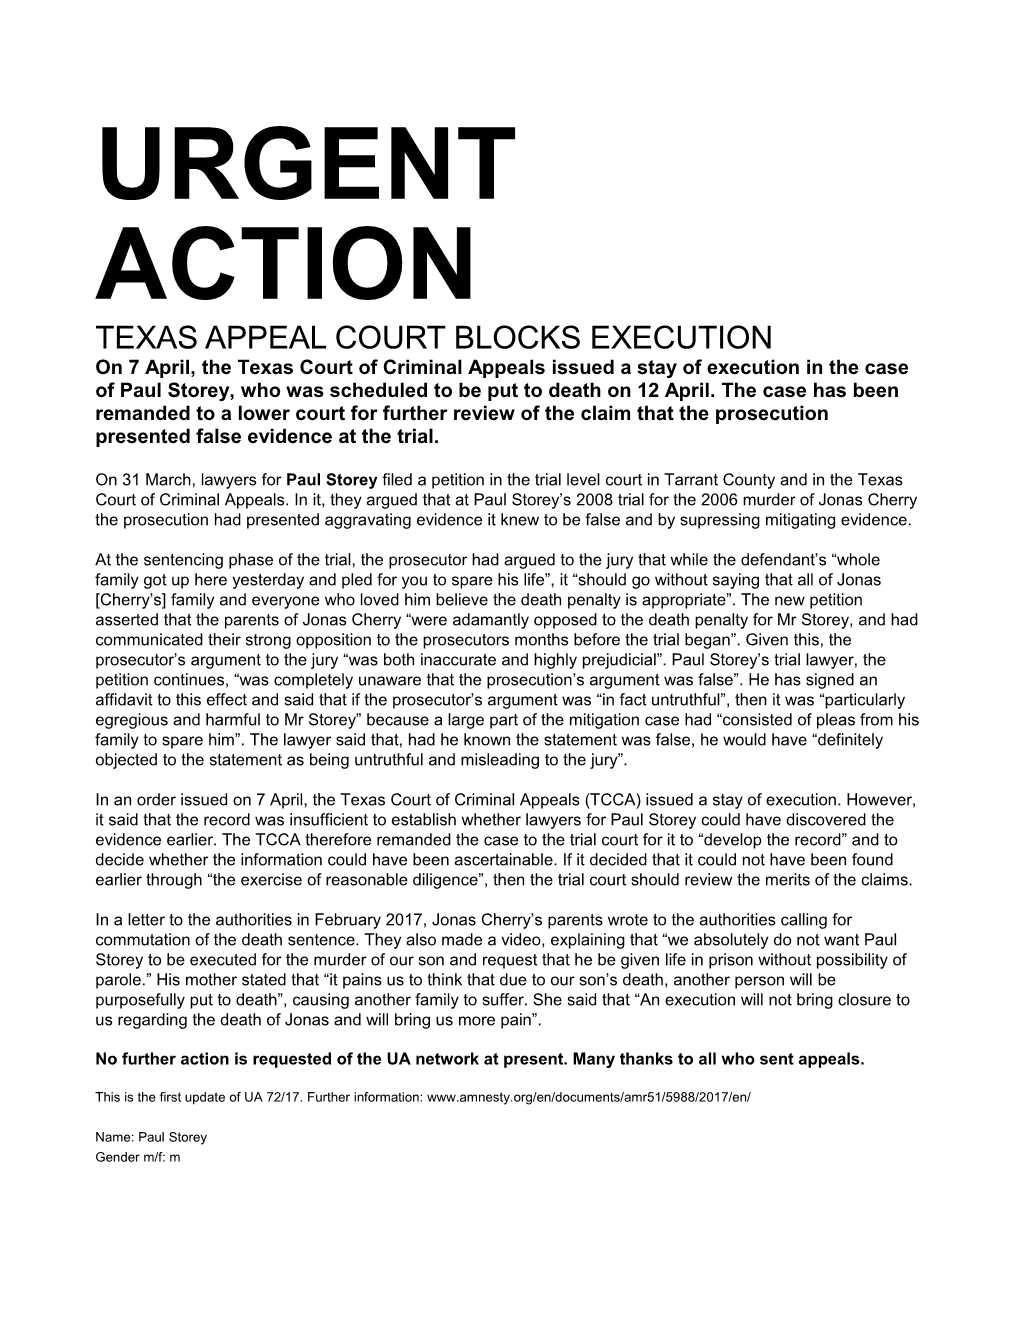 Texas Appeal Court Blocks Execution